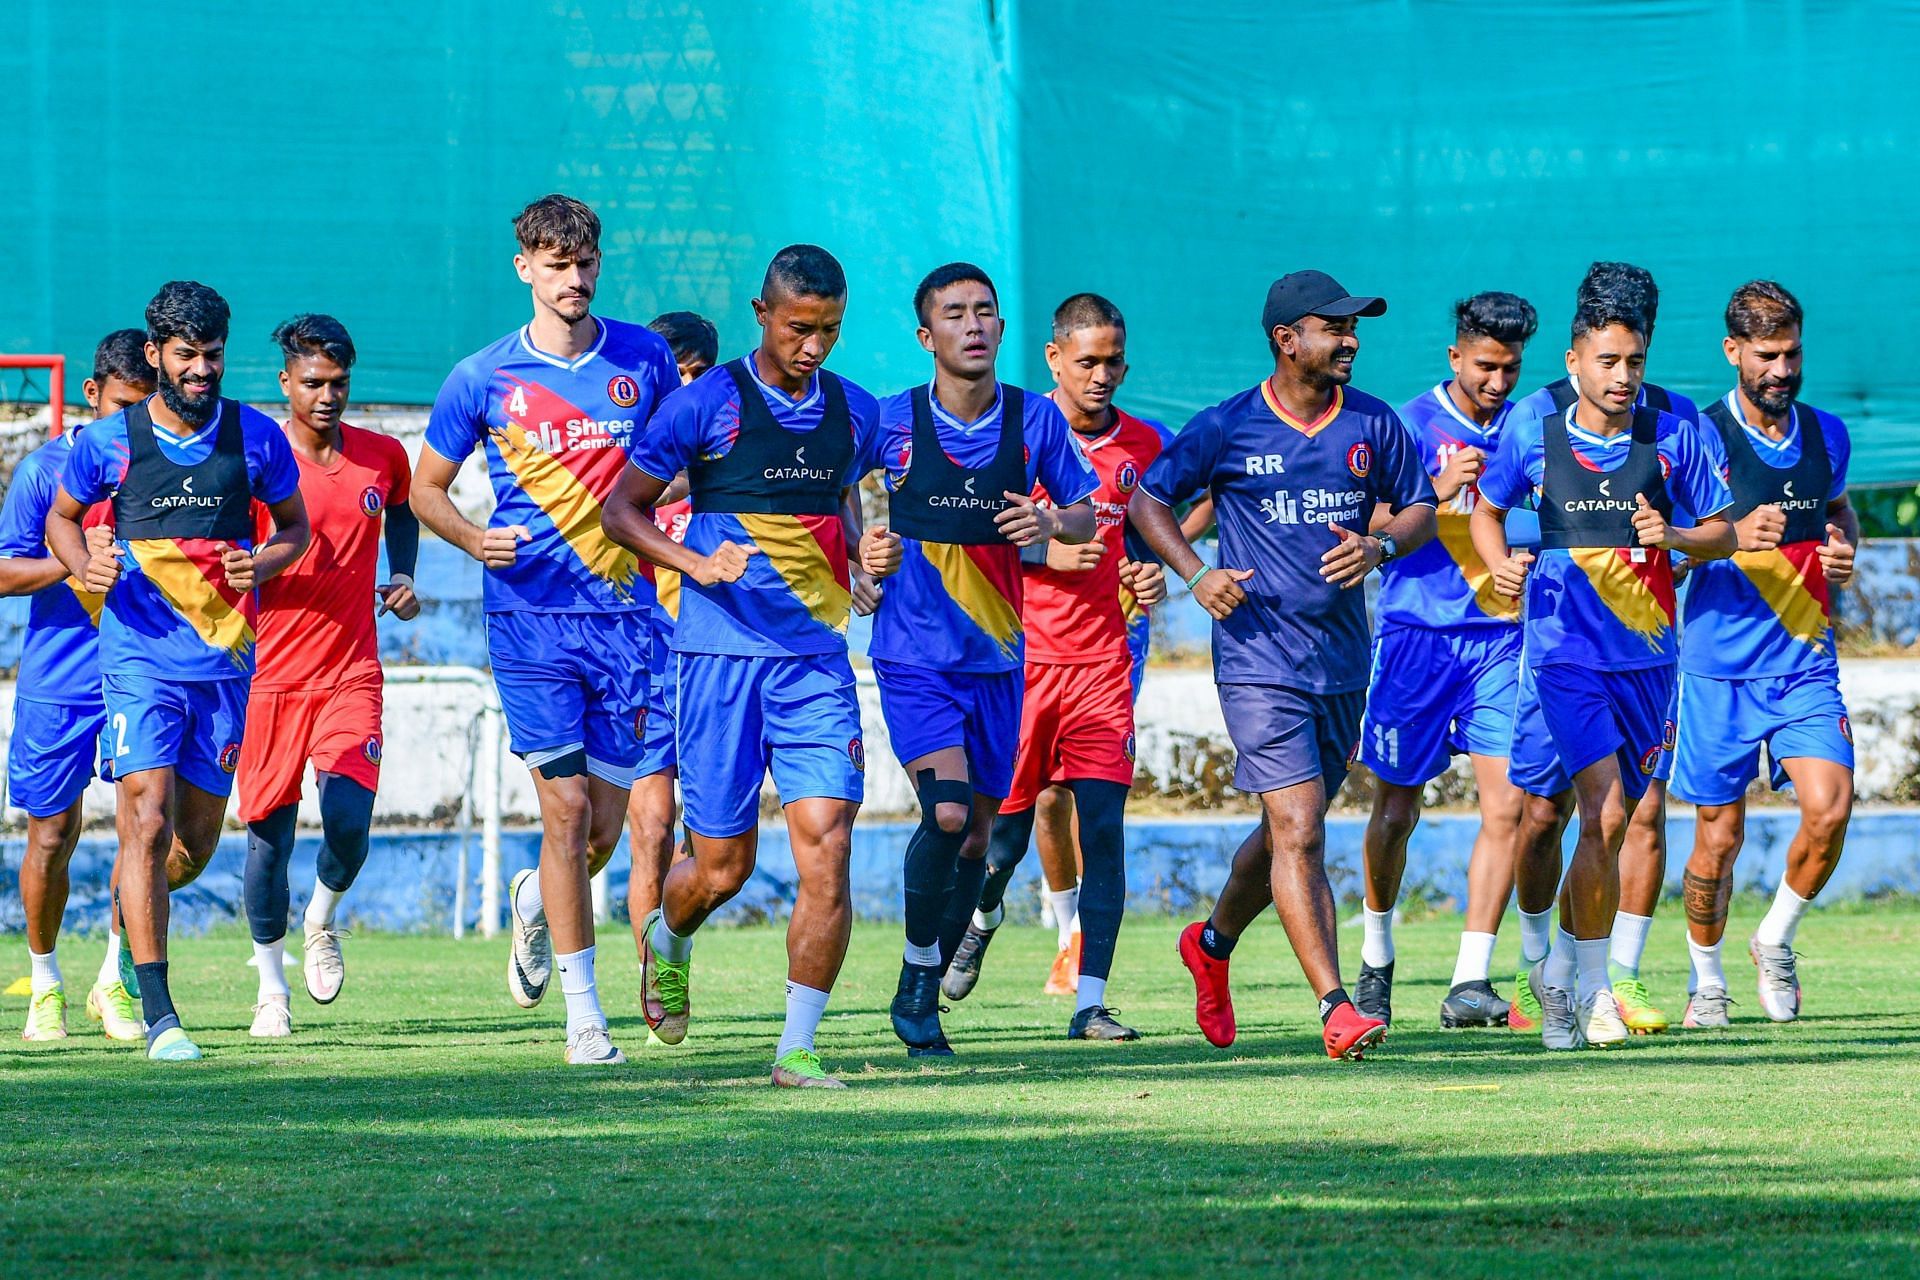 SC East Bengal players training ahead of their clash against Chennaiyin FC. (Image Courtesy: Twitter/sc_eastbengal)